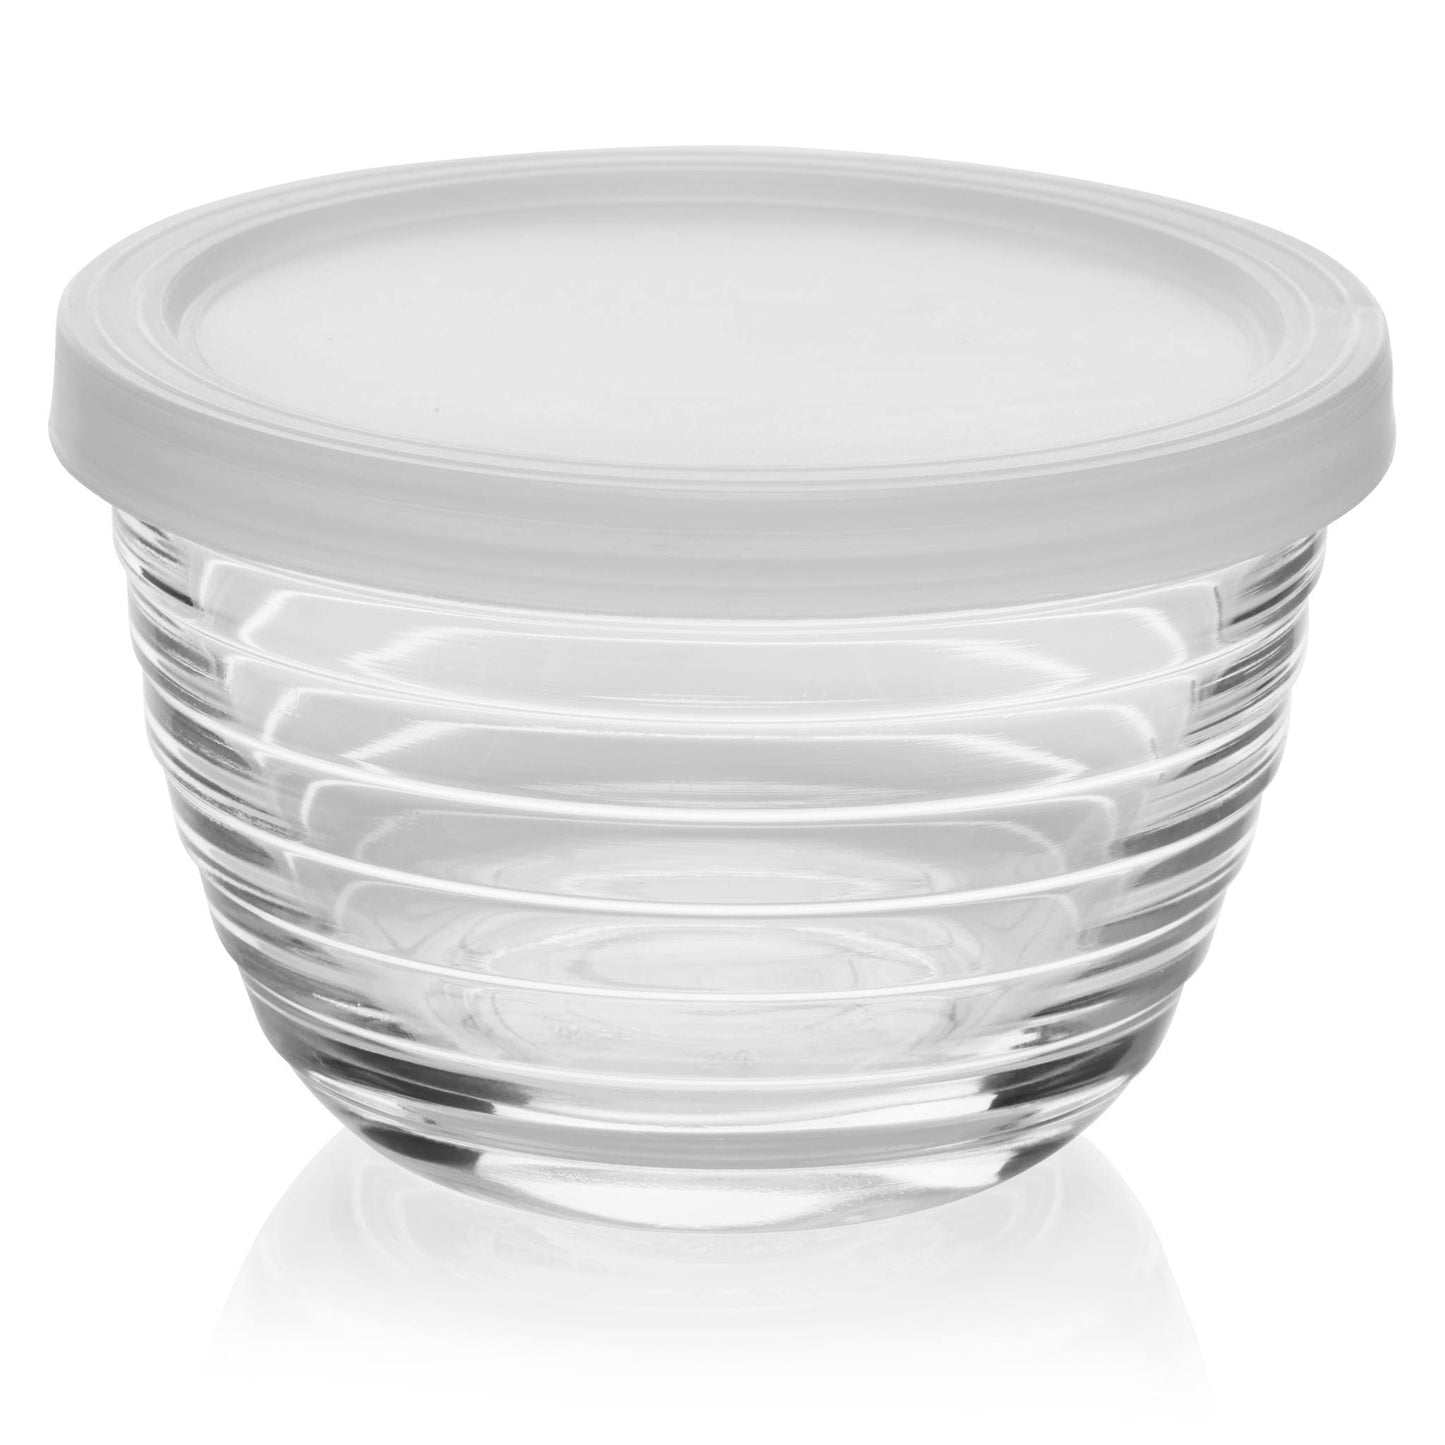 Small Glass Bowl with Lid, 6.25-ounce